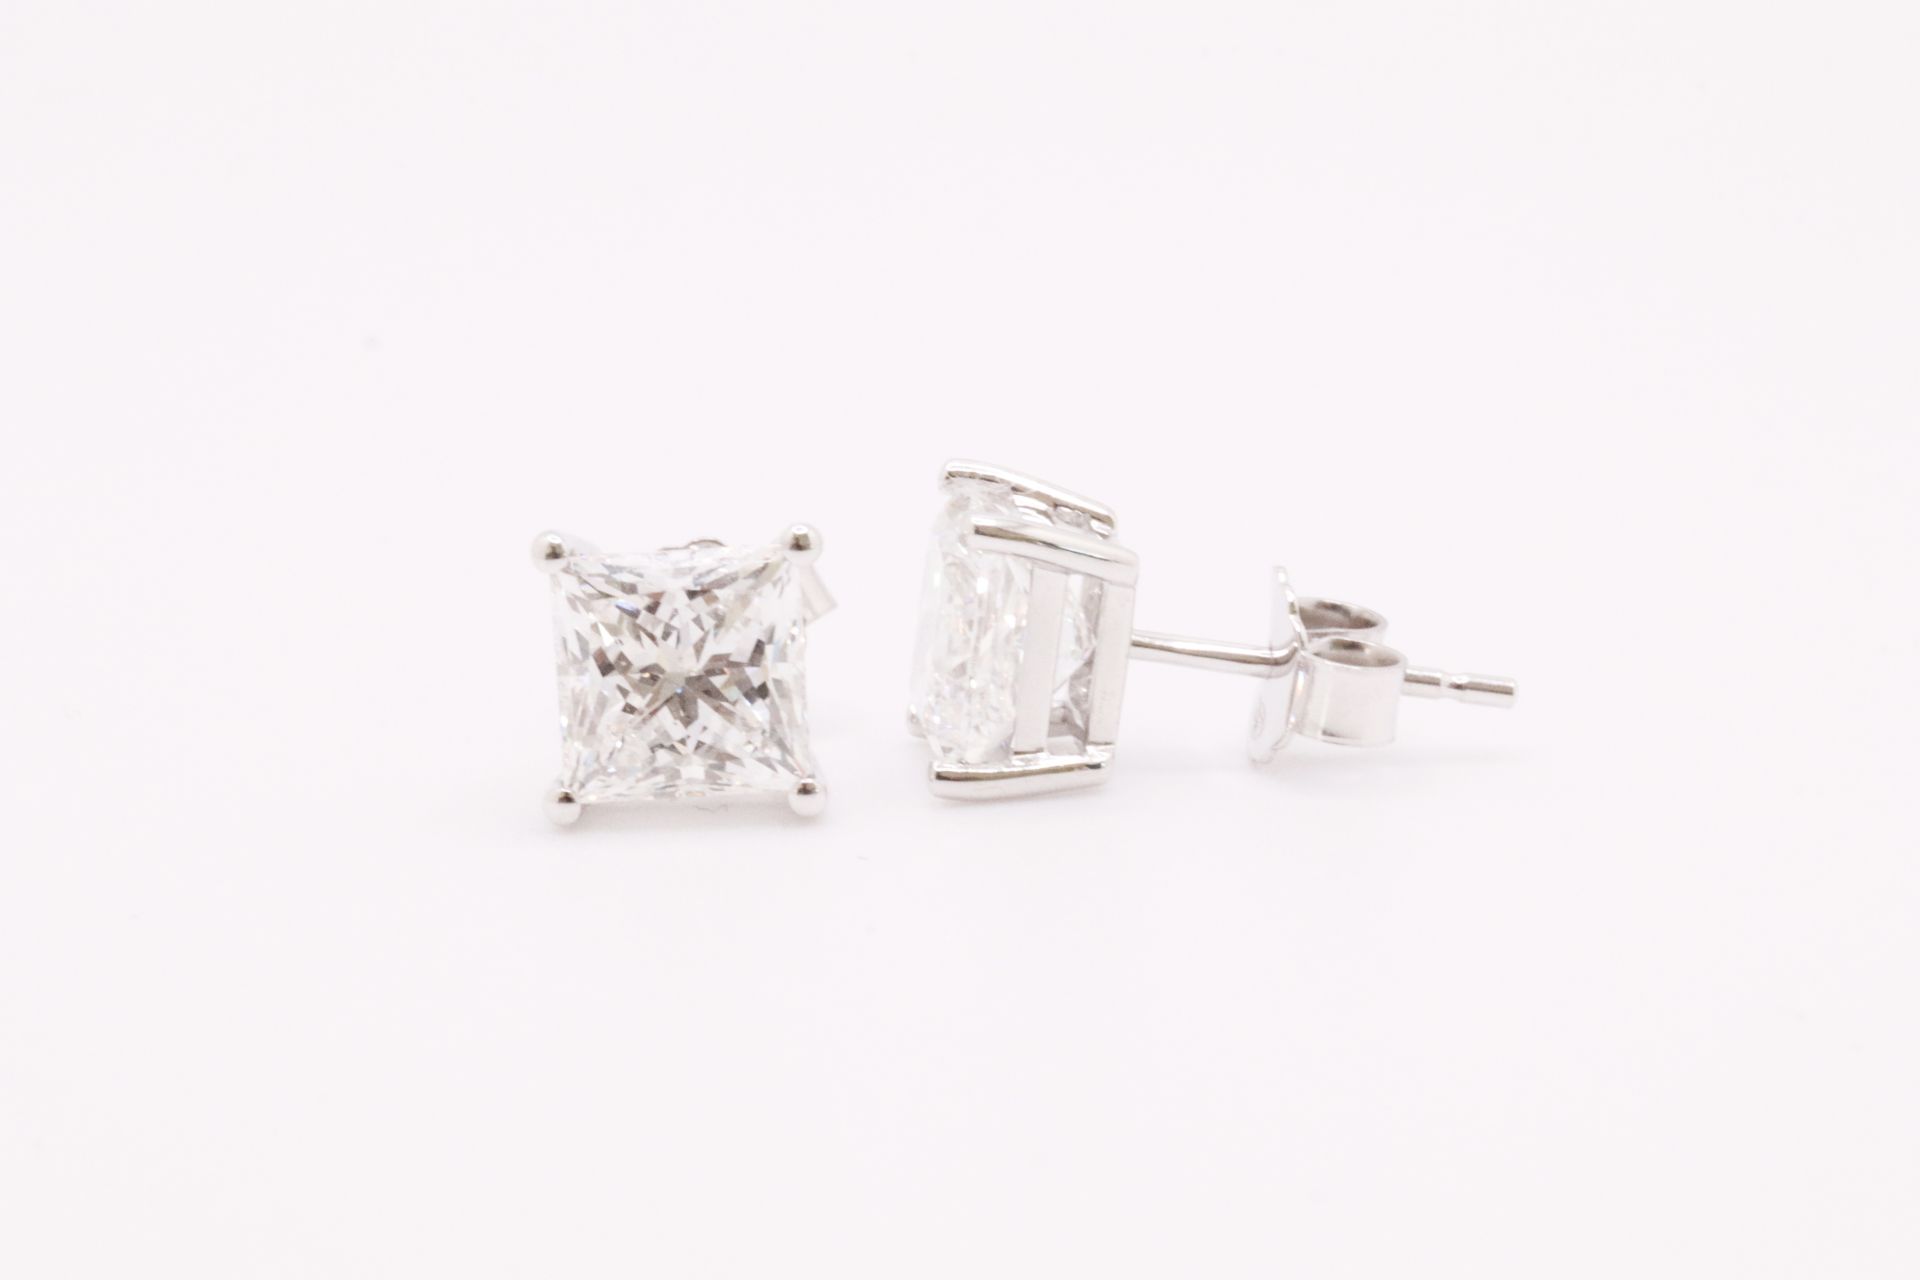 Princess Cut 5.00 Carat Diamond Earrings Set in 18kt White Gold - F Colour SI Clarity - Image 2 of 5